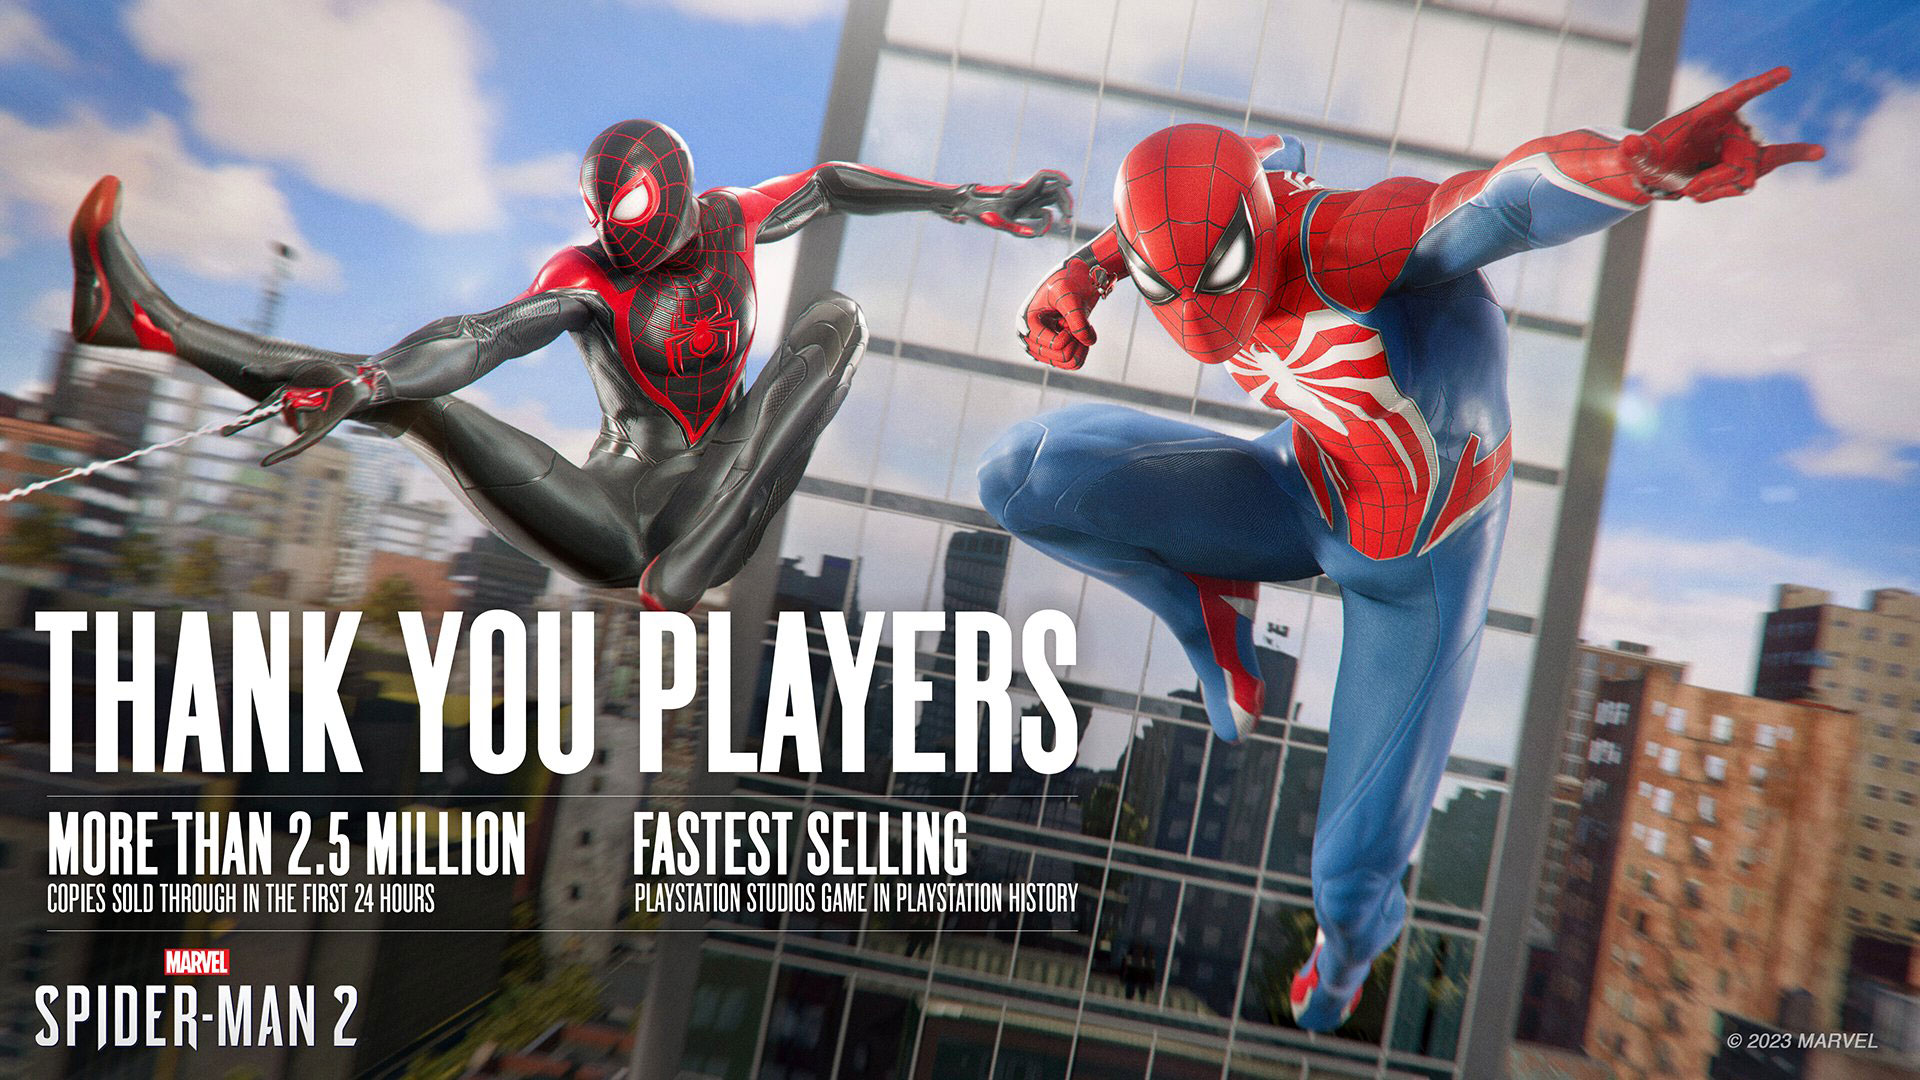 Marvel's Spider-Man 2 is the fastest-selling PlayStation Studios game in PlayStation history